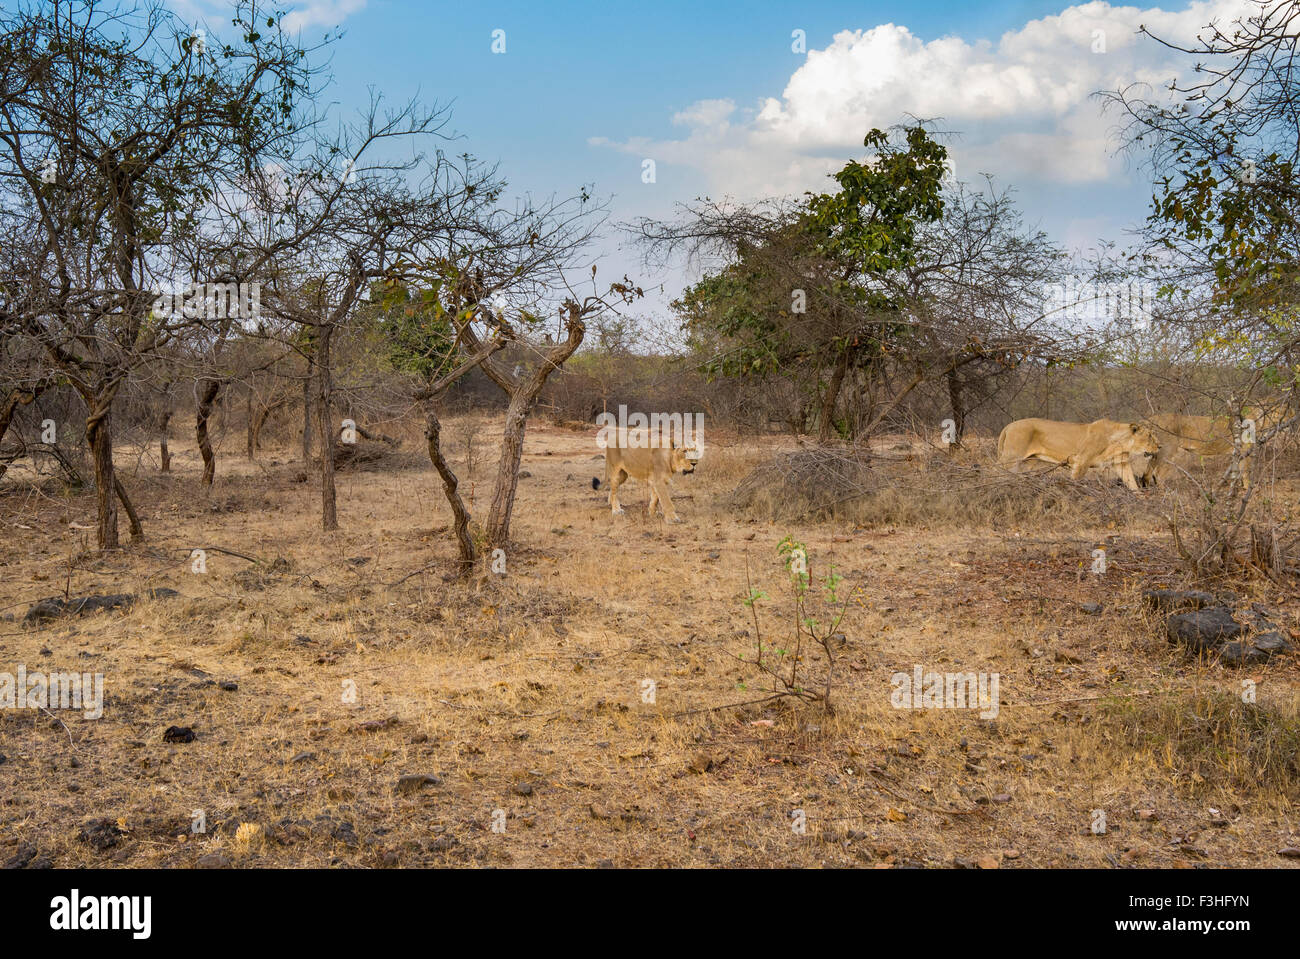 Asiatic Lions Pride [Panthera leo persica] at Gir Forest, Gujarat India. Stock Photo